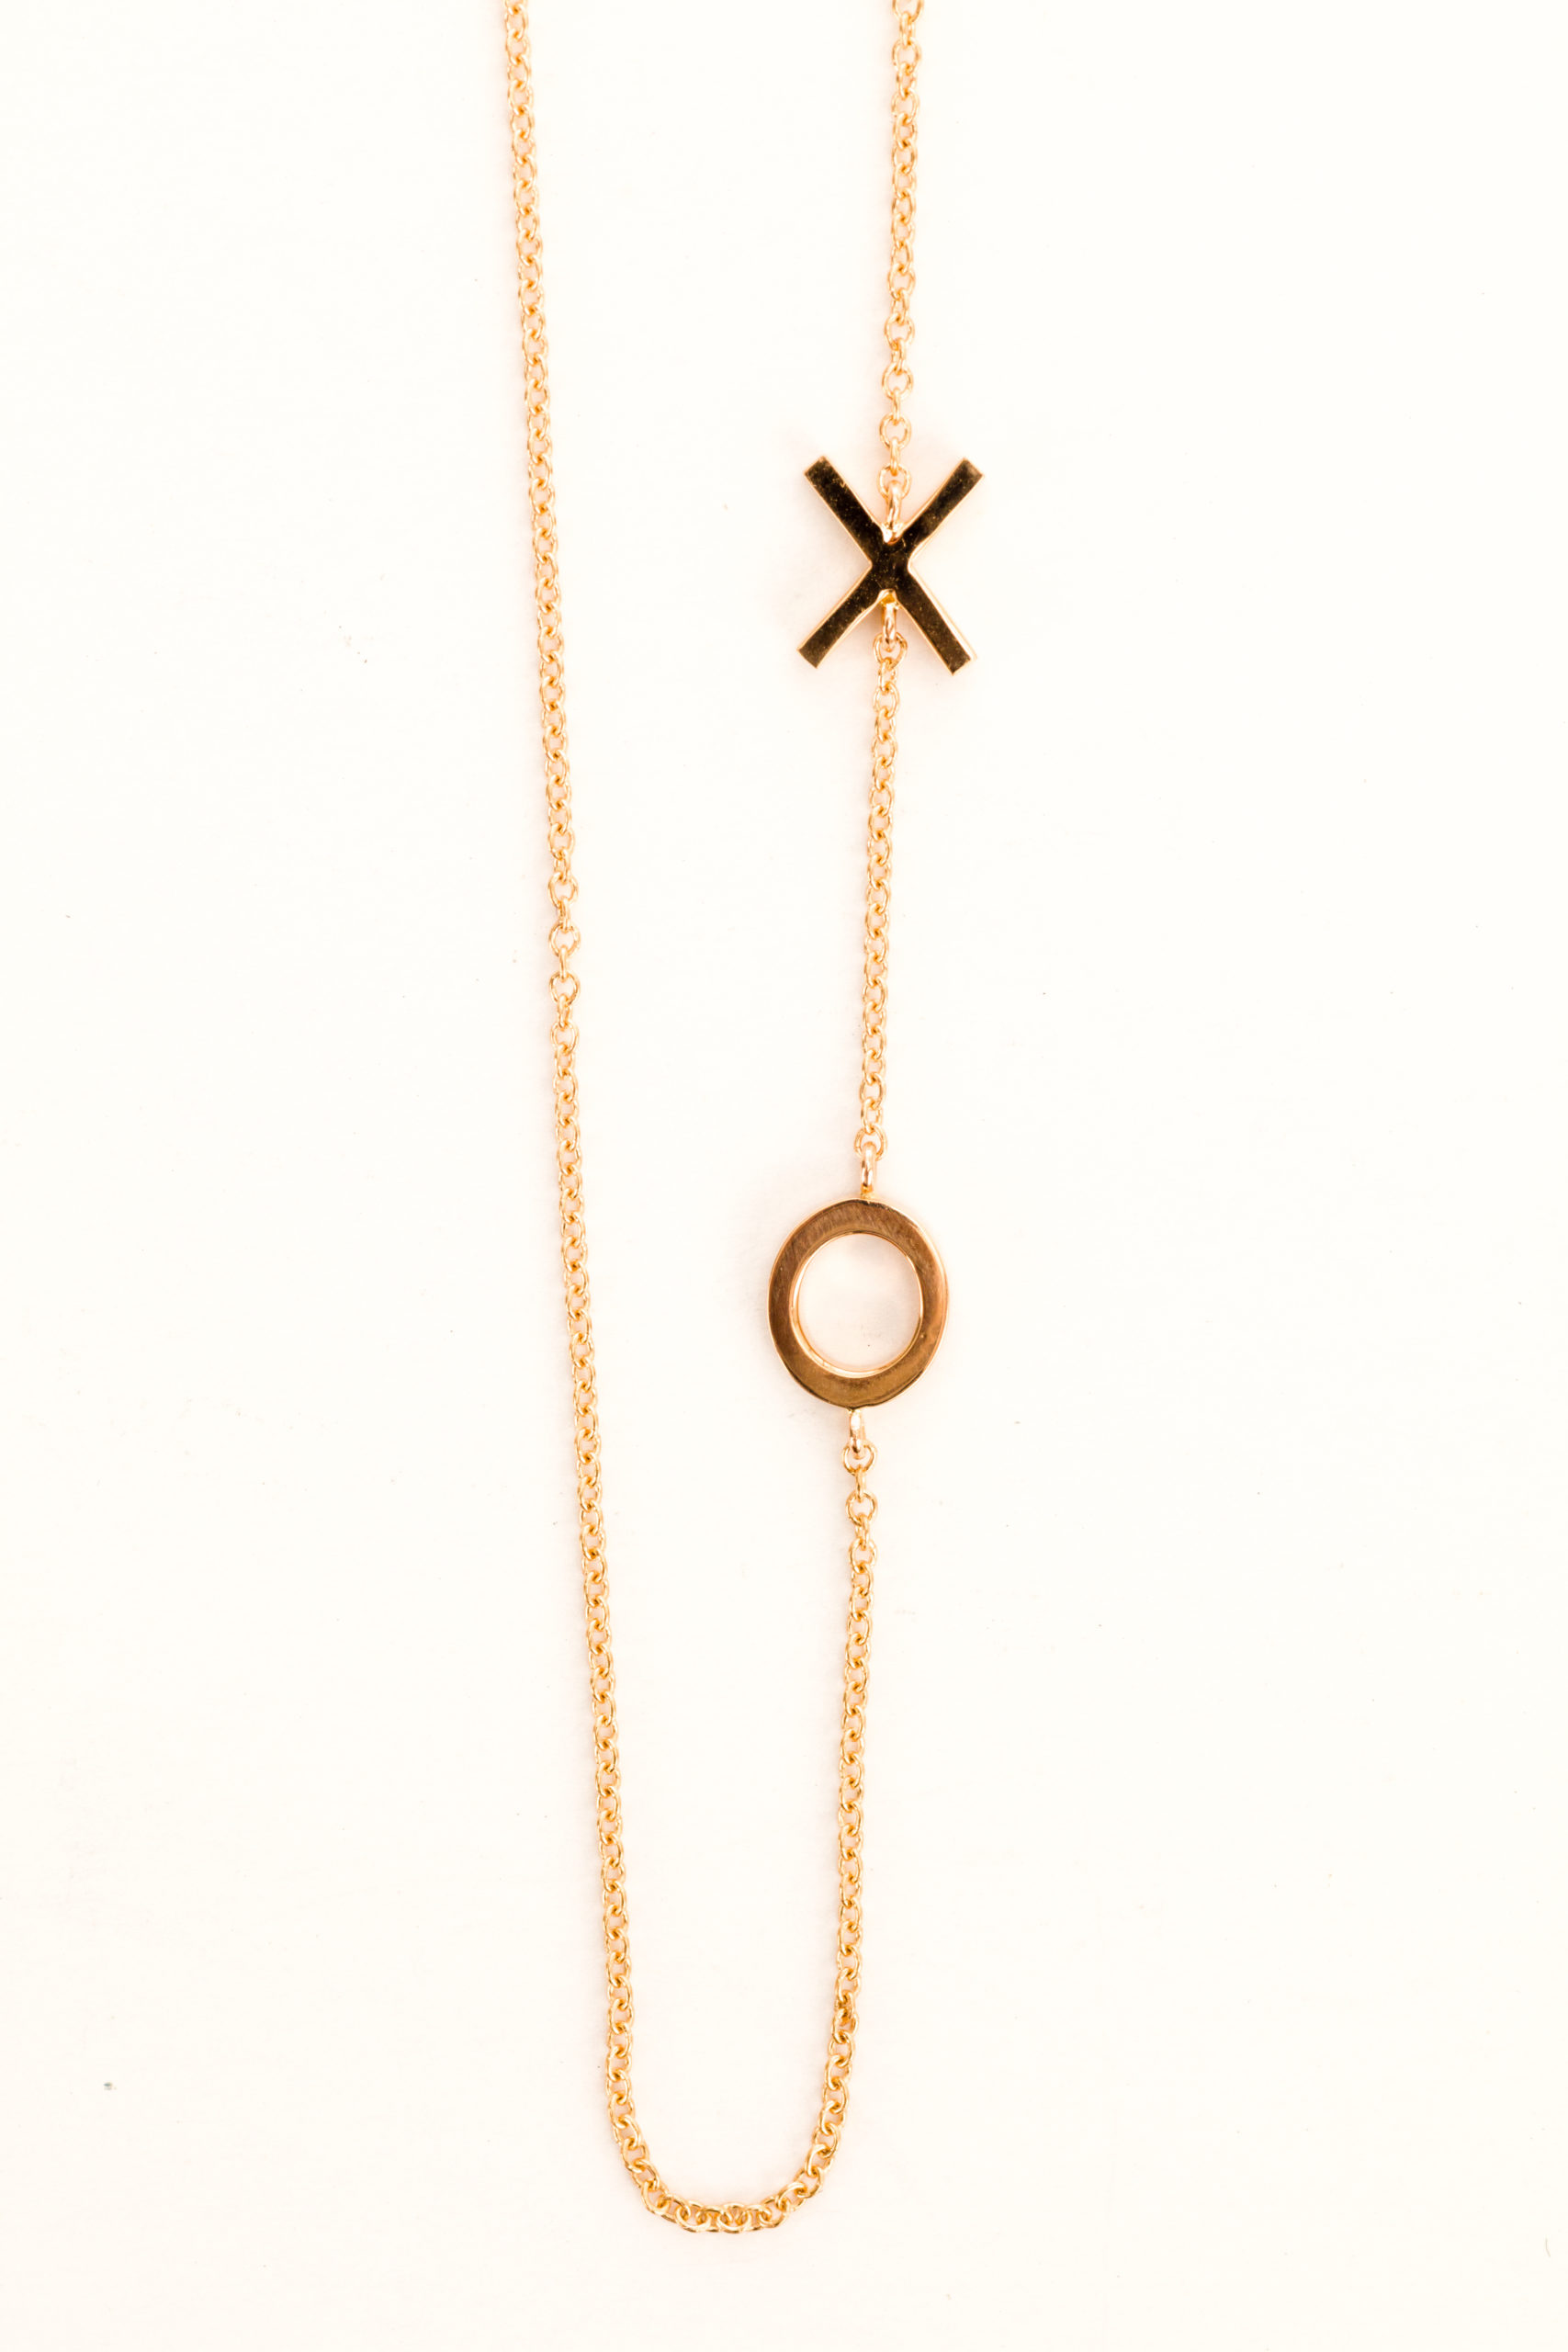 XO Hugs and Kisses Necklace Tri-Color in Real 14K Gold | Why Love